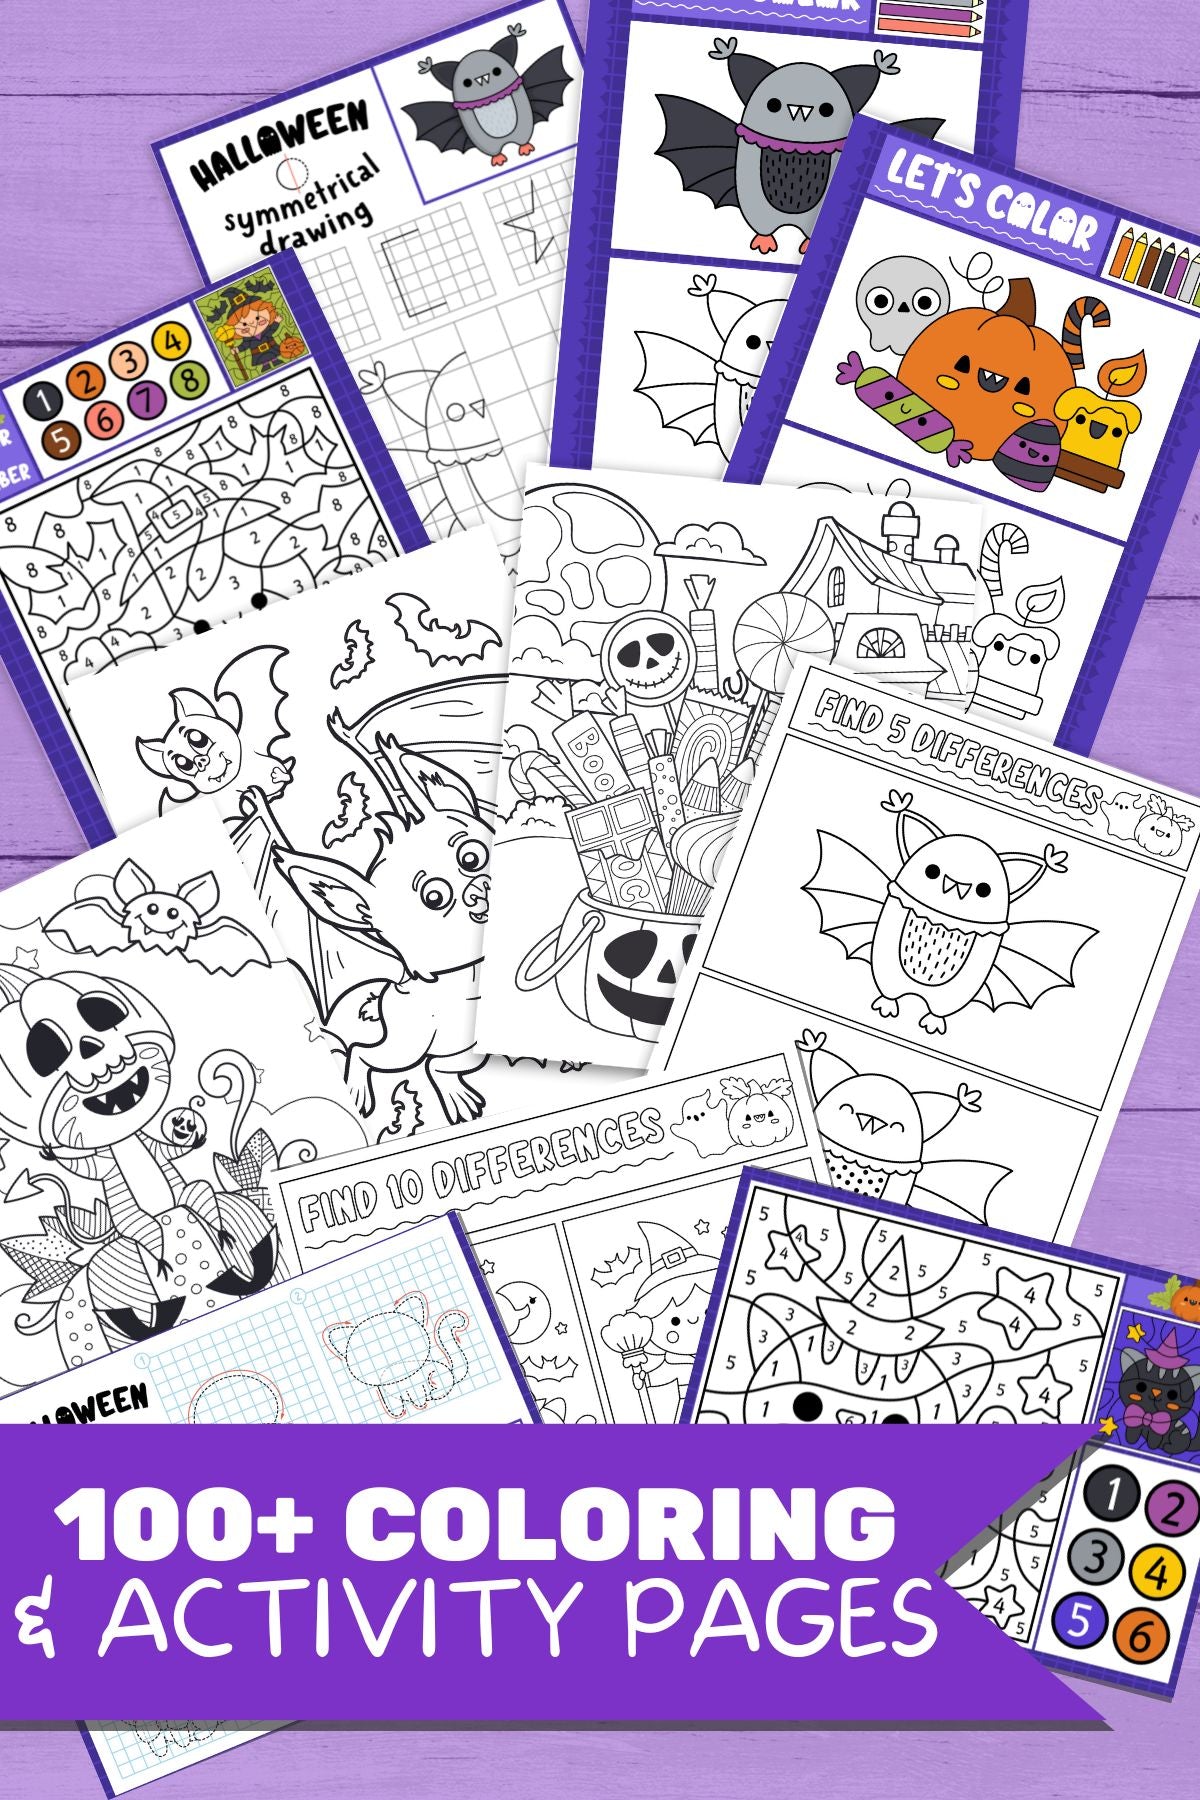 Free Printable Games Coloring Pages for Kids